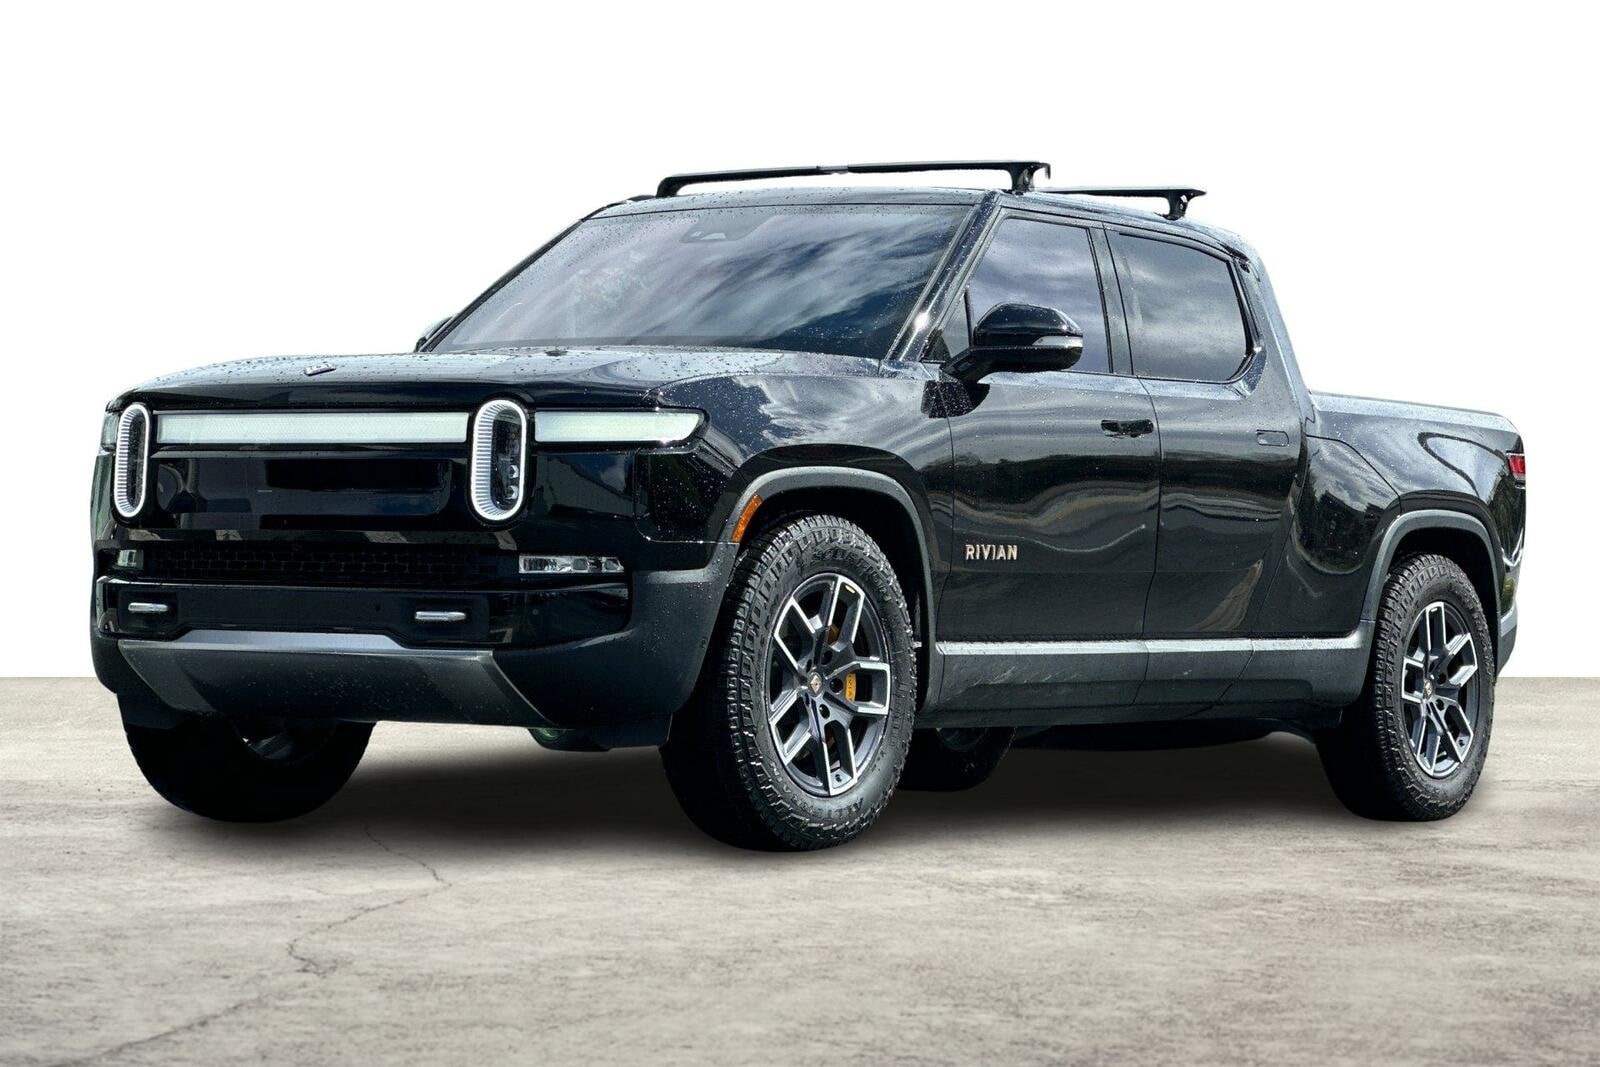 Used 2022 Rivian R1T Launch Edition with VIN 7FCTGAAL0NN003749 for sale in Palo Alto, CA